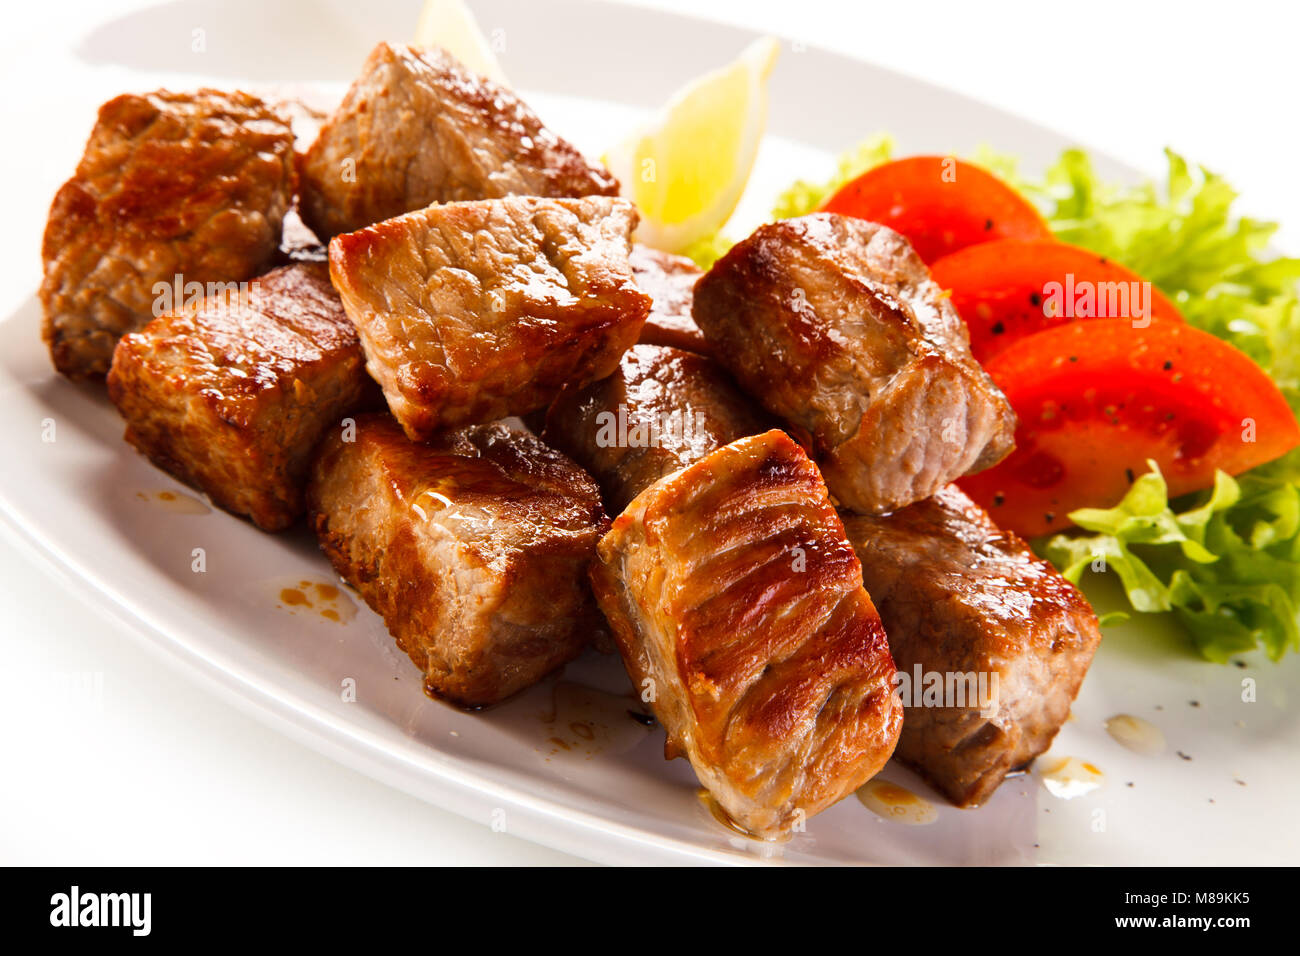 Kebabs - grilled meat and vegetables Stock Photo